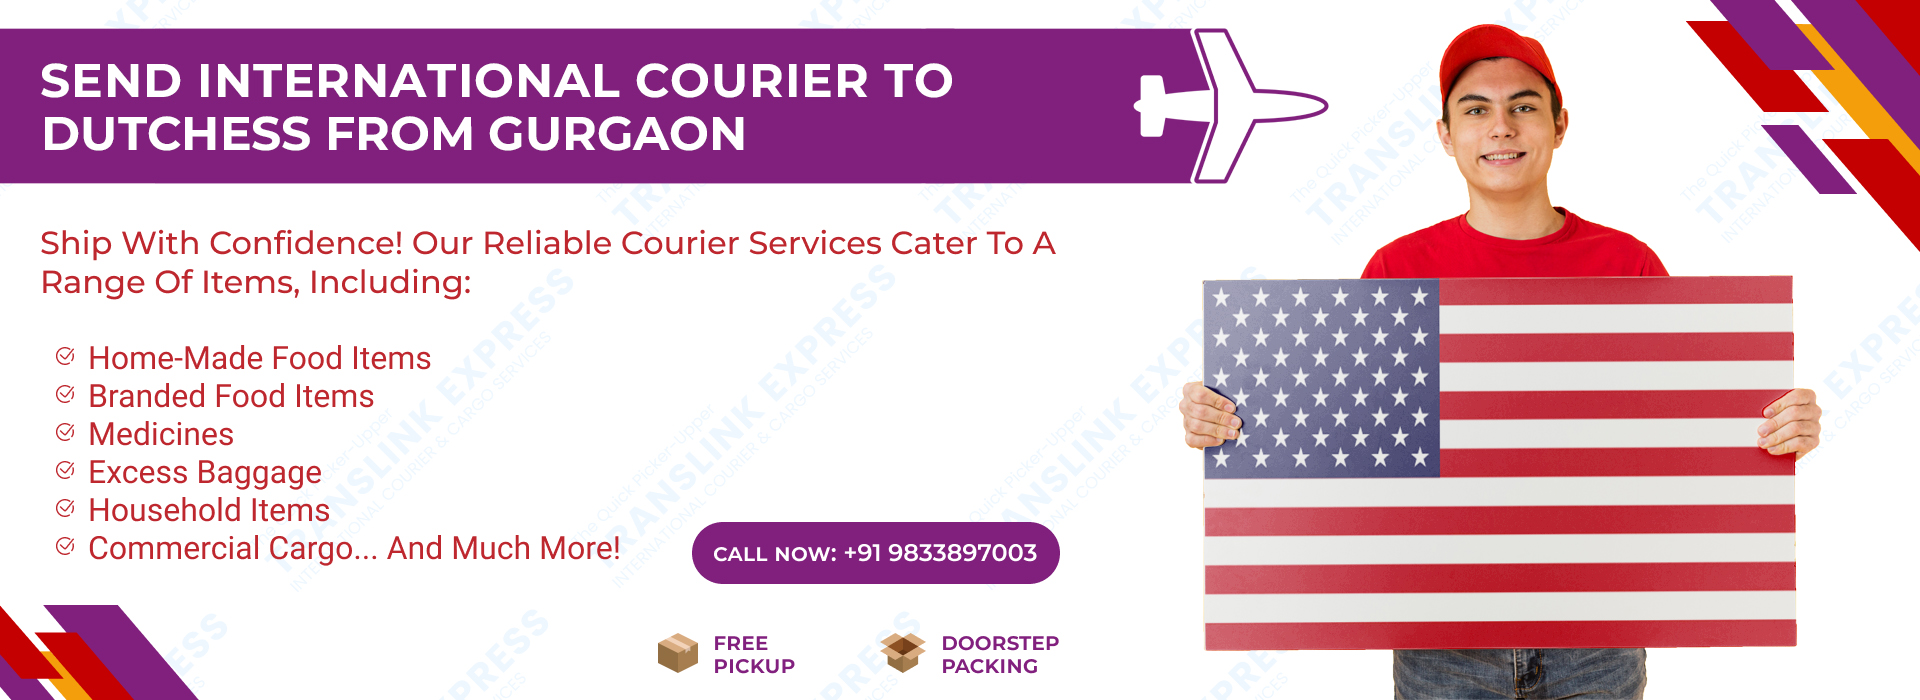 Courier to Dutchess From Gurgaon